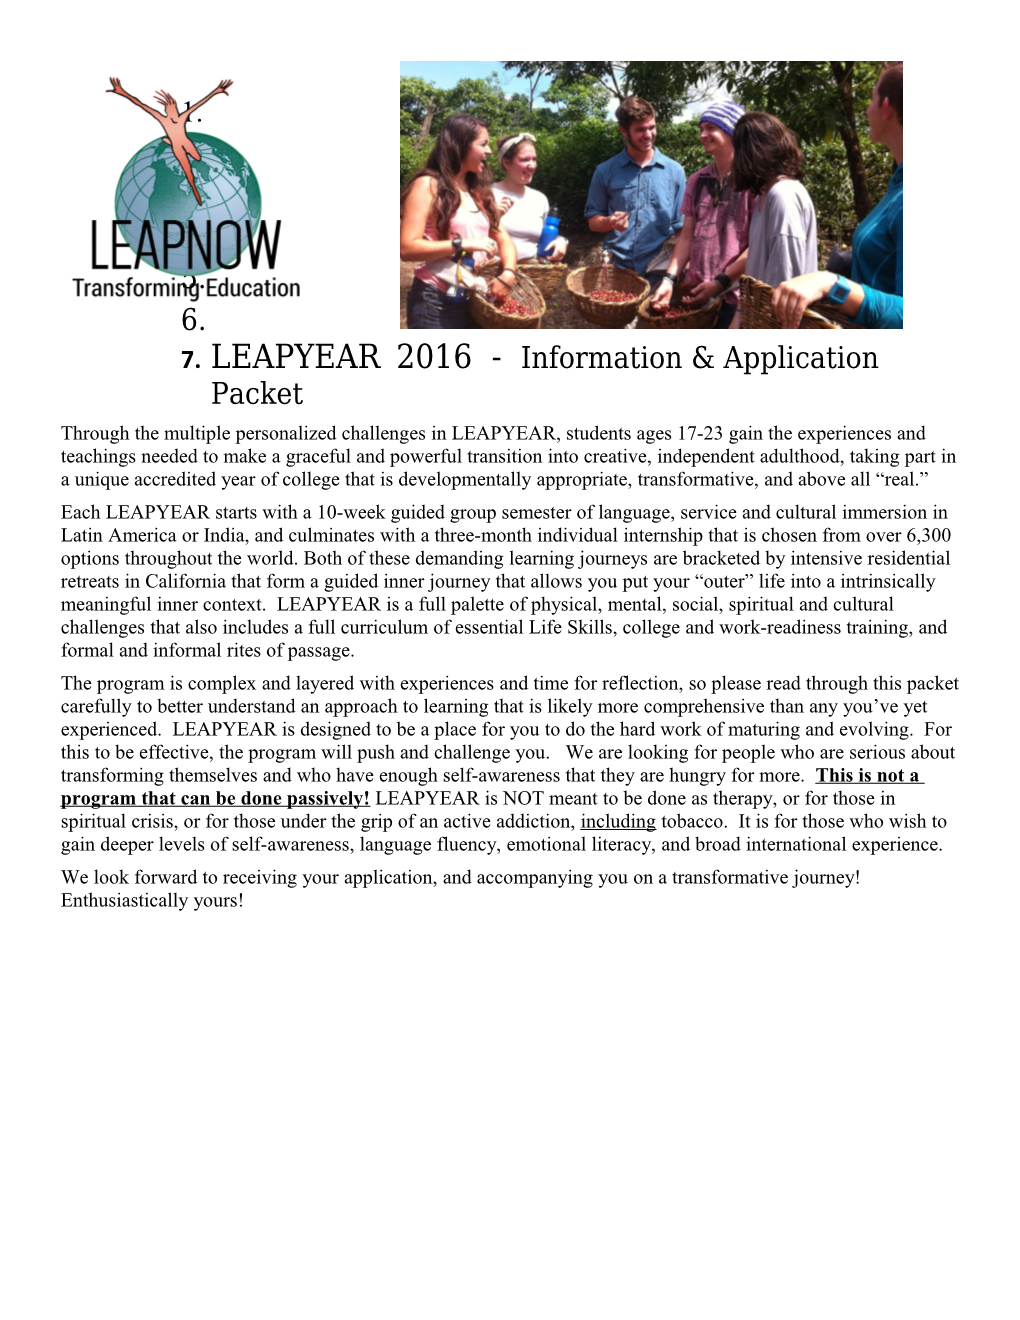 LEAPYEAR 2016 - Information & Application Packet